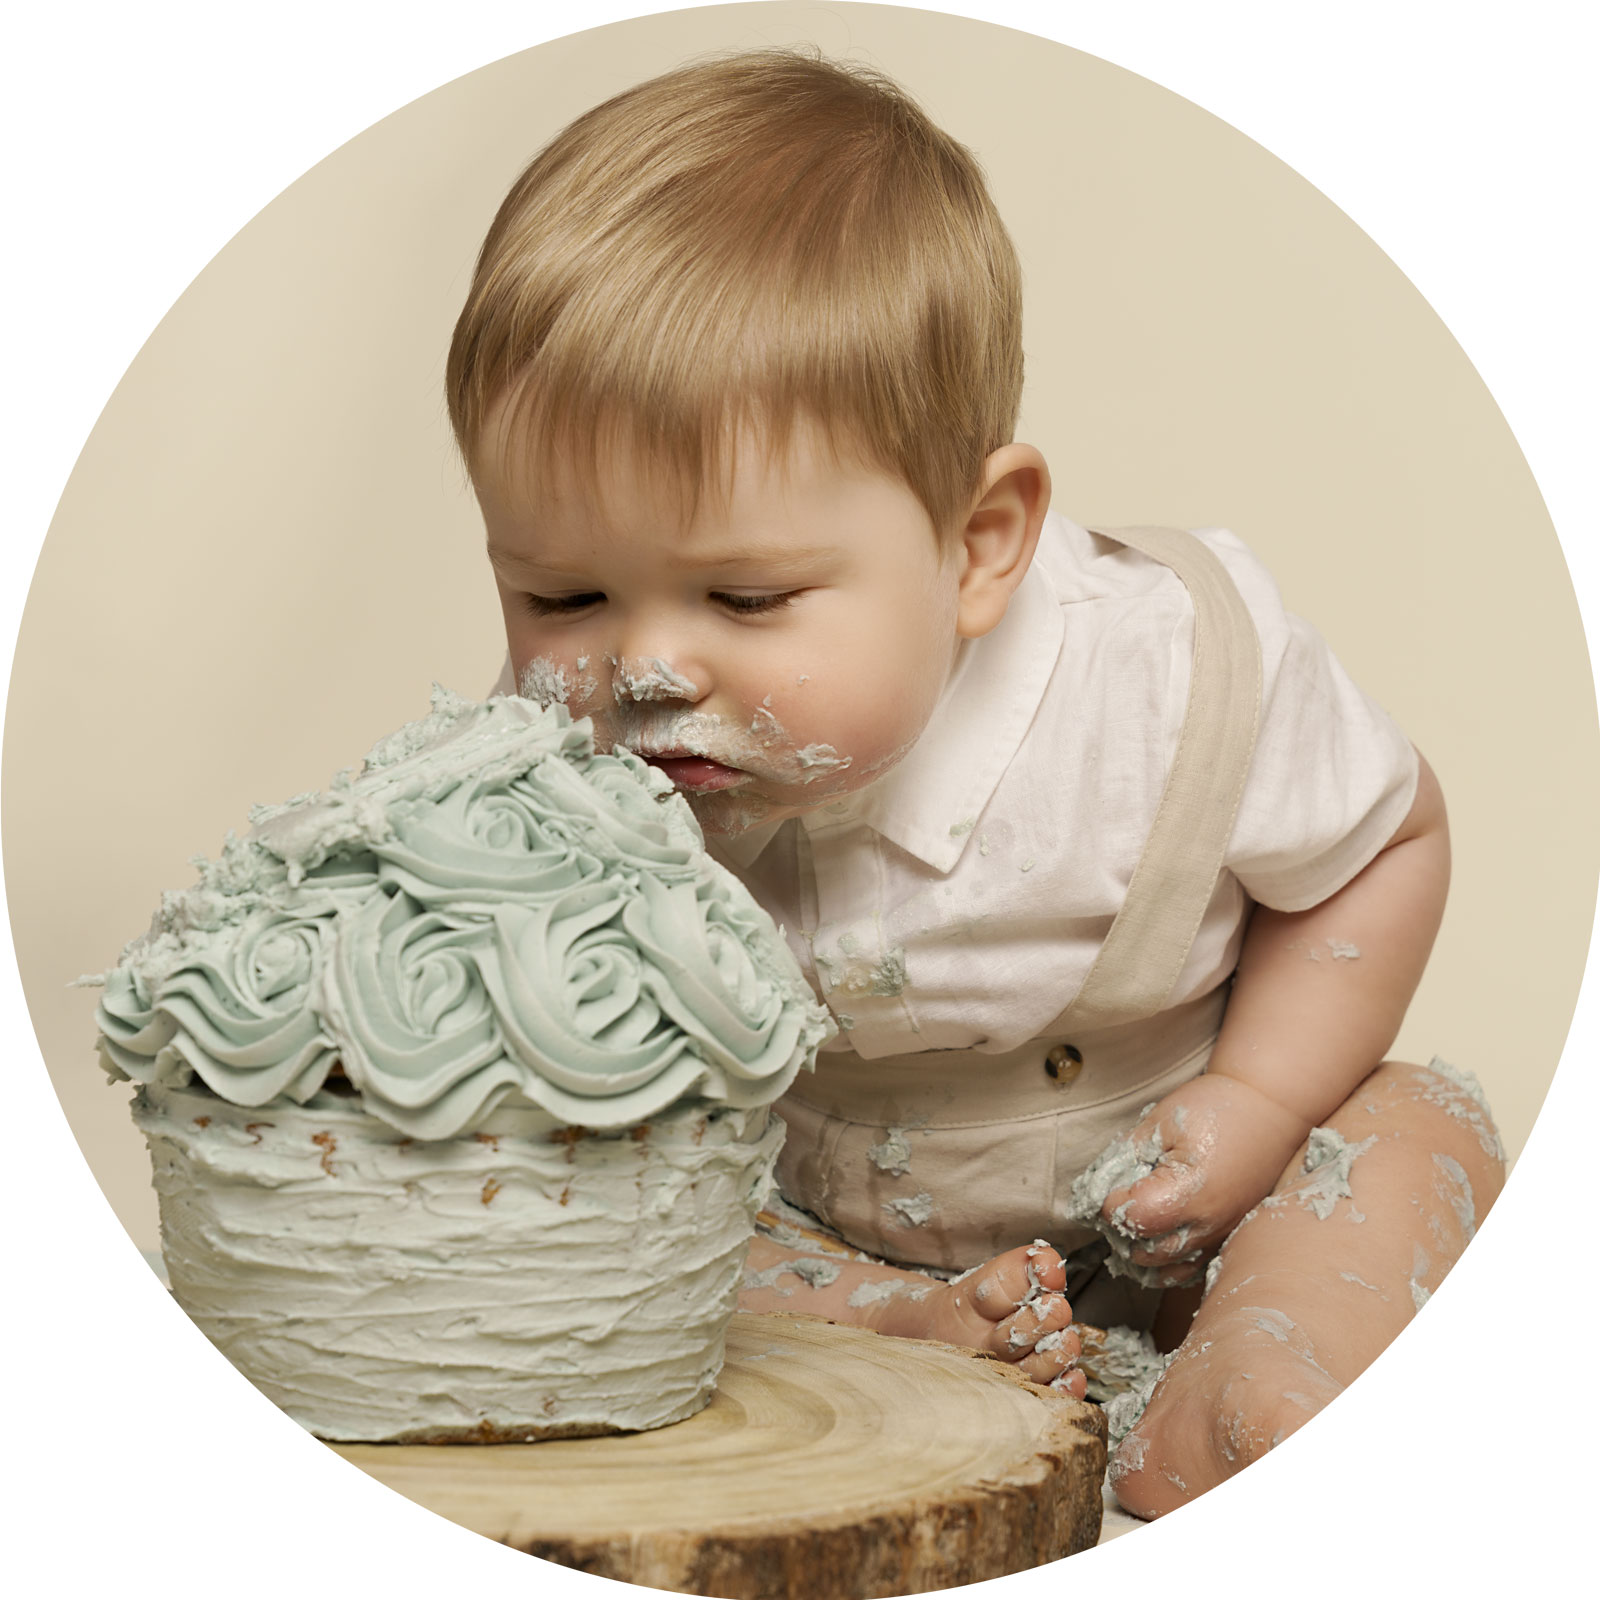 One year old boy dressed in a white shirt and cream coloured dungarees, planting his face into a blue coloured giant cupcake.